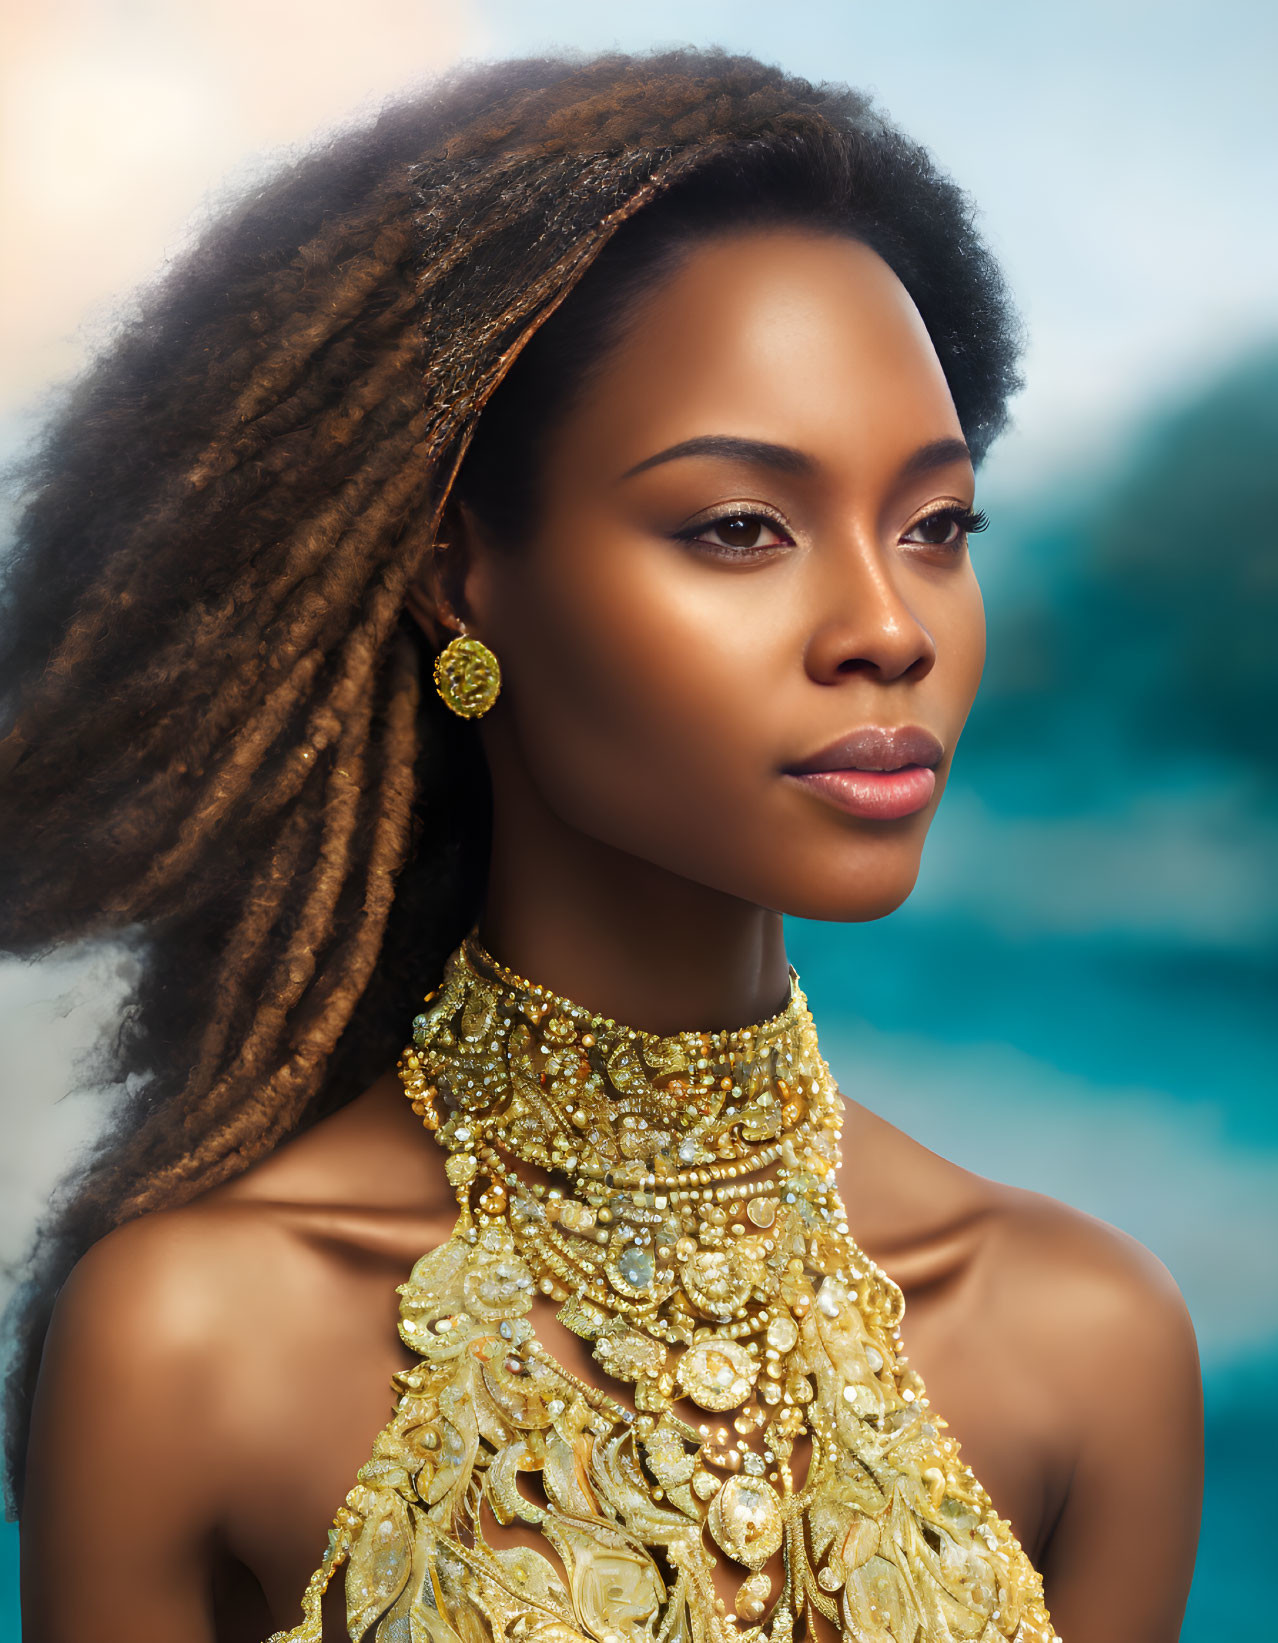 Long dreadlocked woman in golden jewelry against blurred background